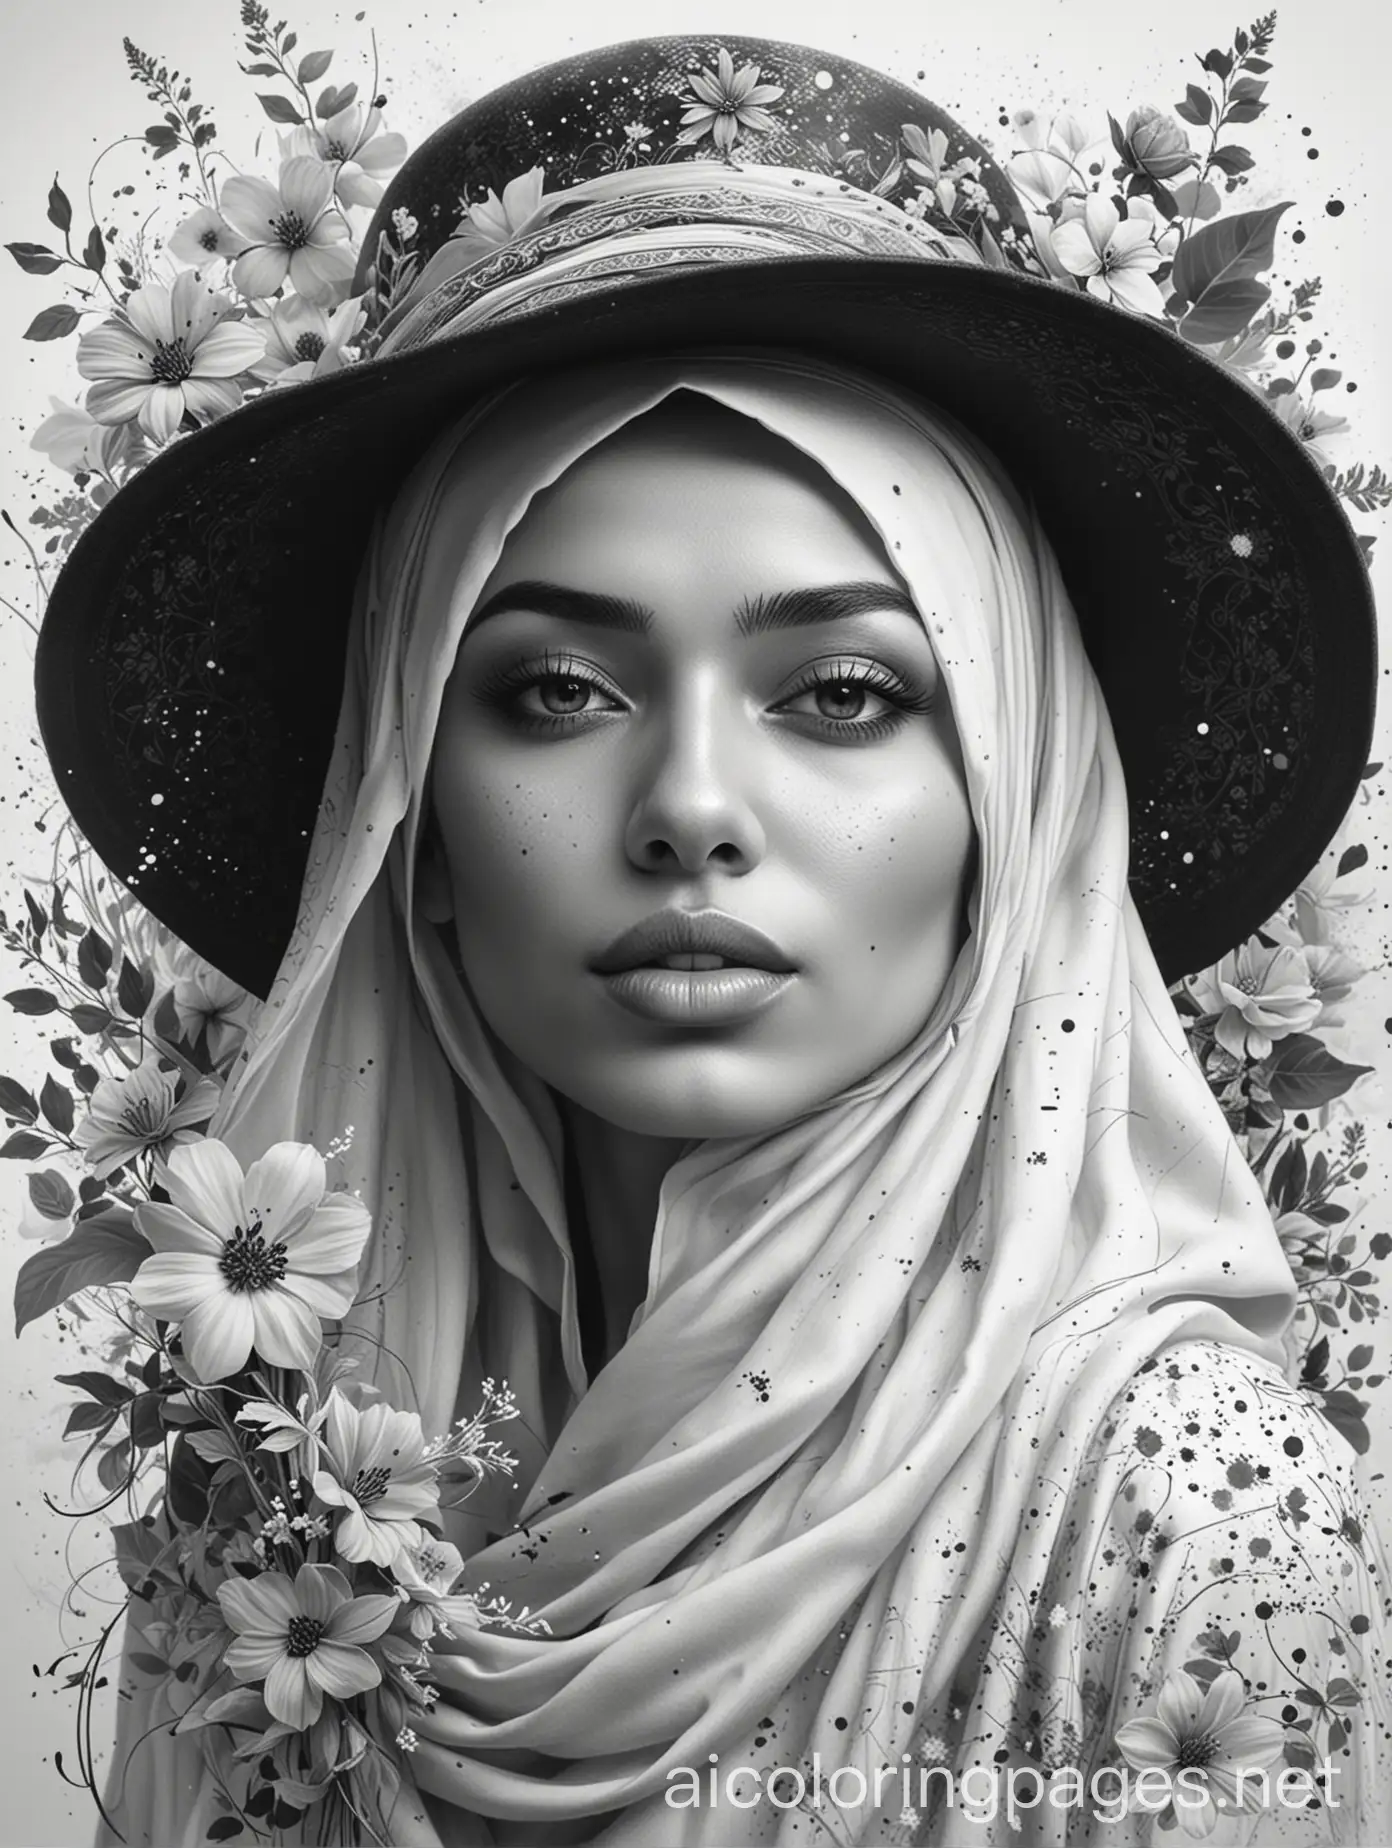 A monochromatic portrait of a woman wearing a hijab and a broad-brimmed hat adorned with flowers. Her expression is serene as she gazes downward. The background features a mix of smoky and splatter effects, blending seamlessly with floral elements. The overall aesthetic is artistic and elegant., Coloring Page, black and white, line art, white background, Simplicity, Ample White Space